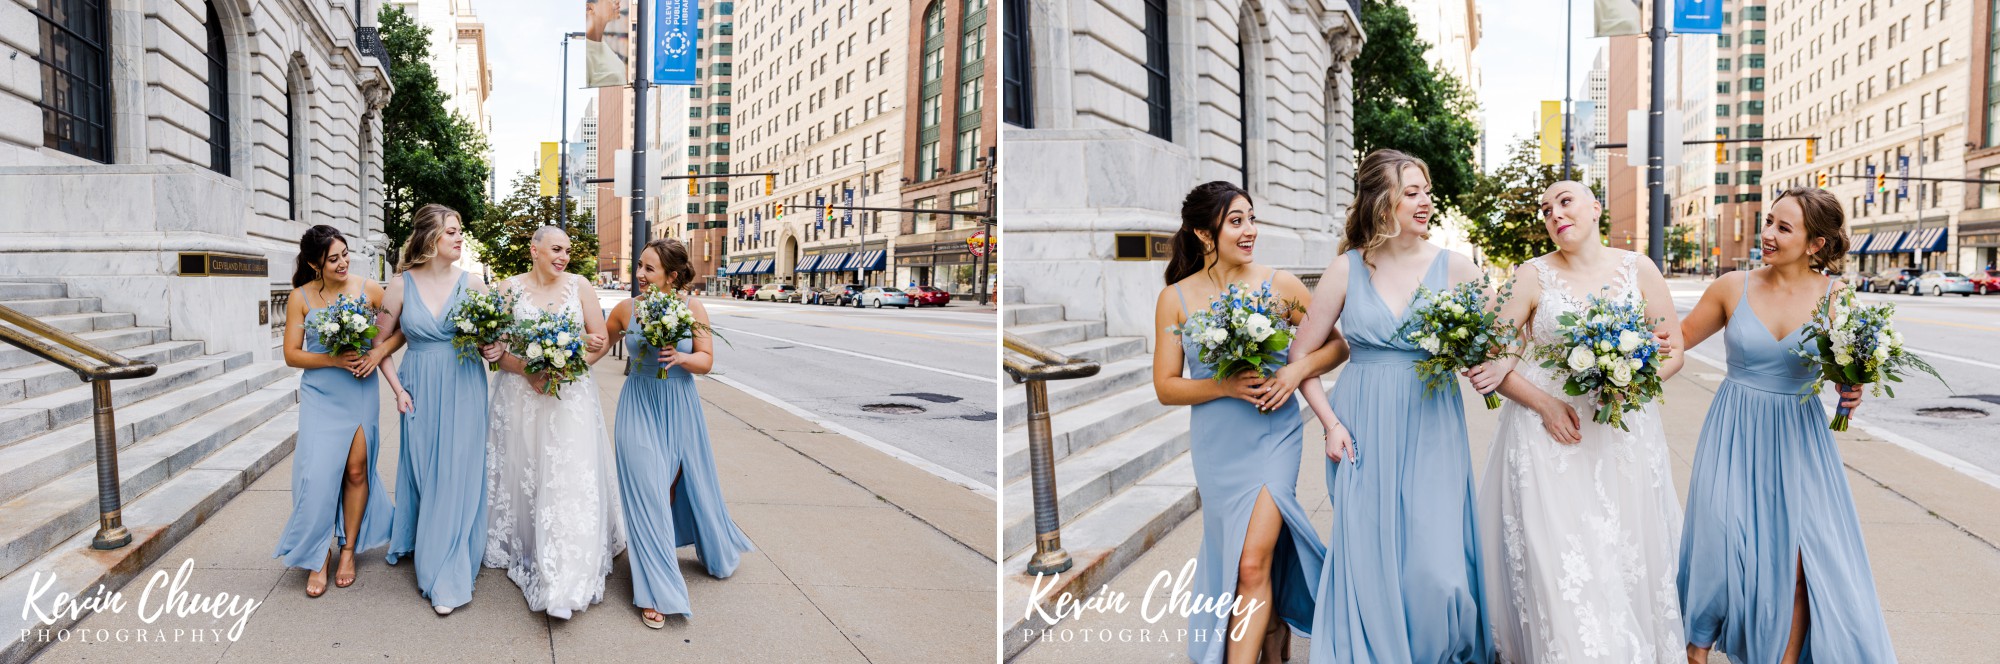 Bride and Bridesmaids Portraits outside of Cleveland Public Library in Downtown Cleveland